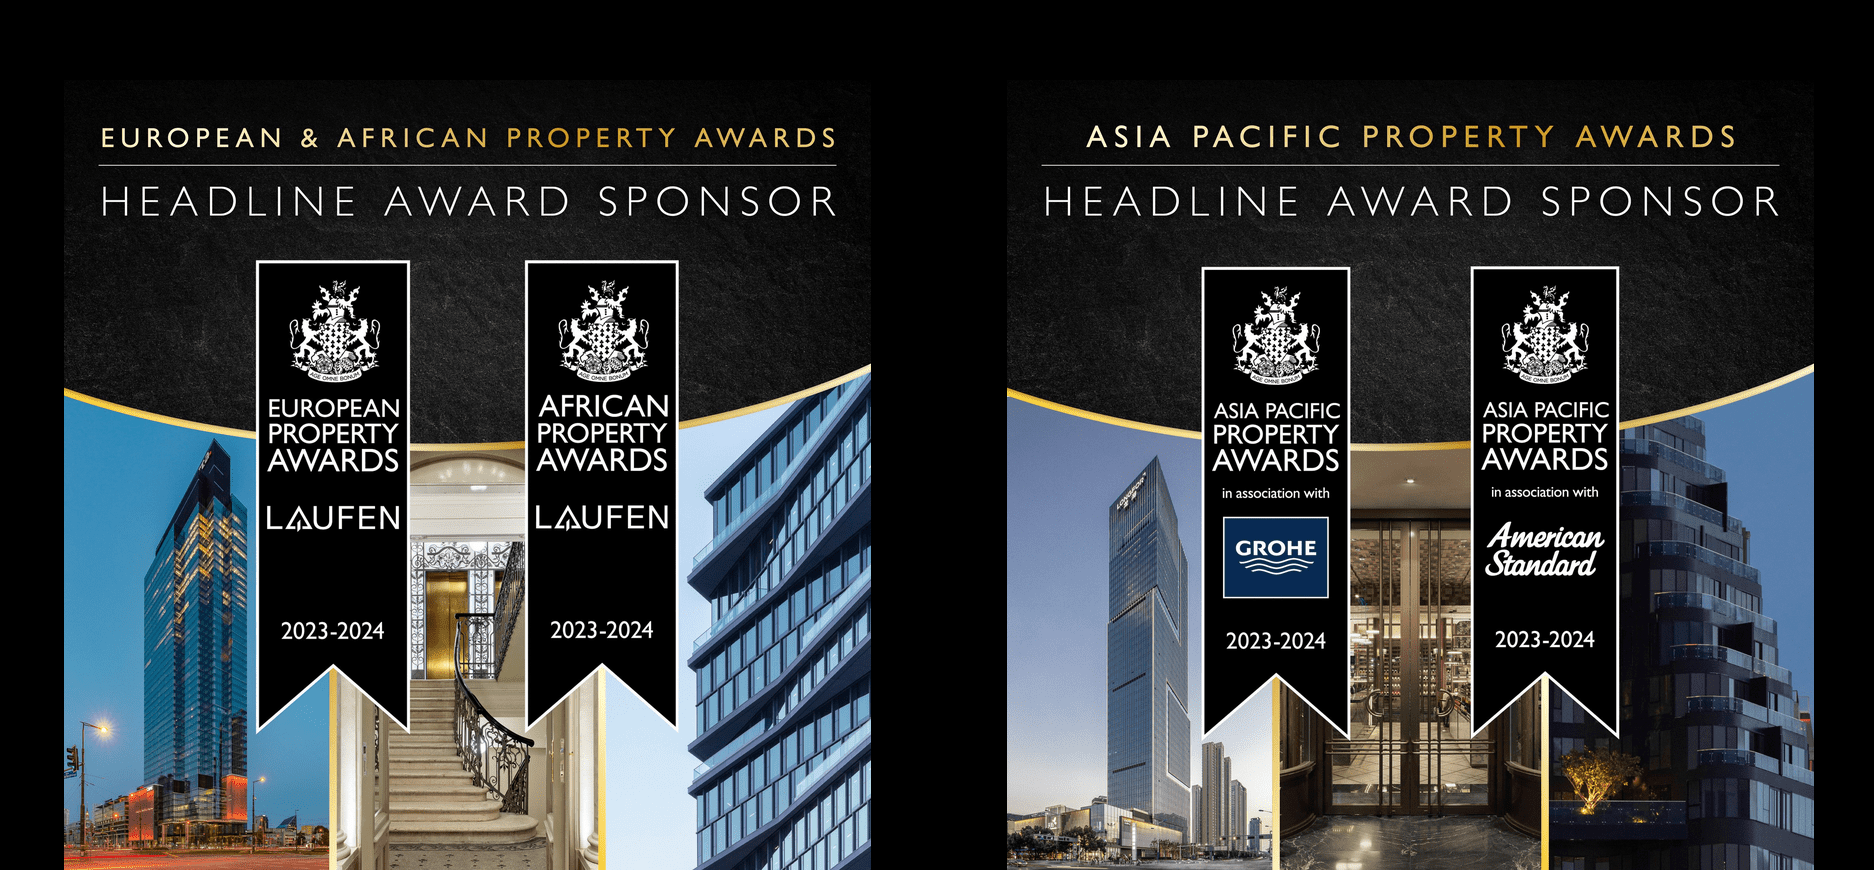 Official Headline Award Sponsors of the European, African & Asia Pacific Property Awards 2023 – 2024